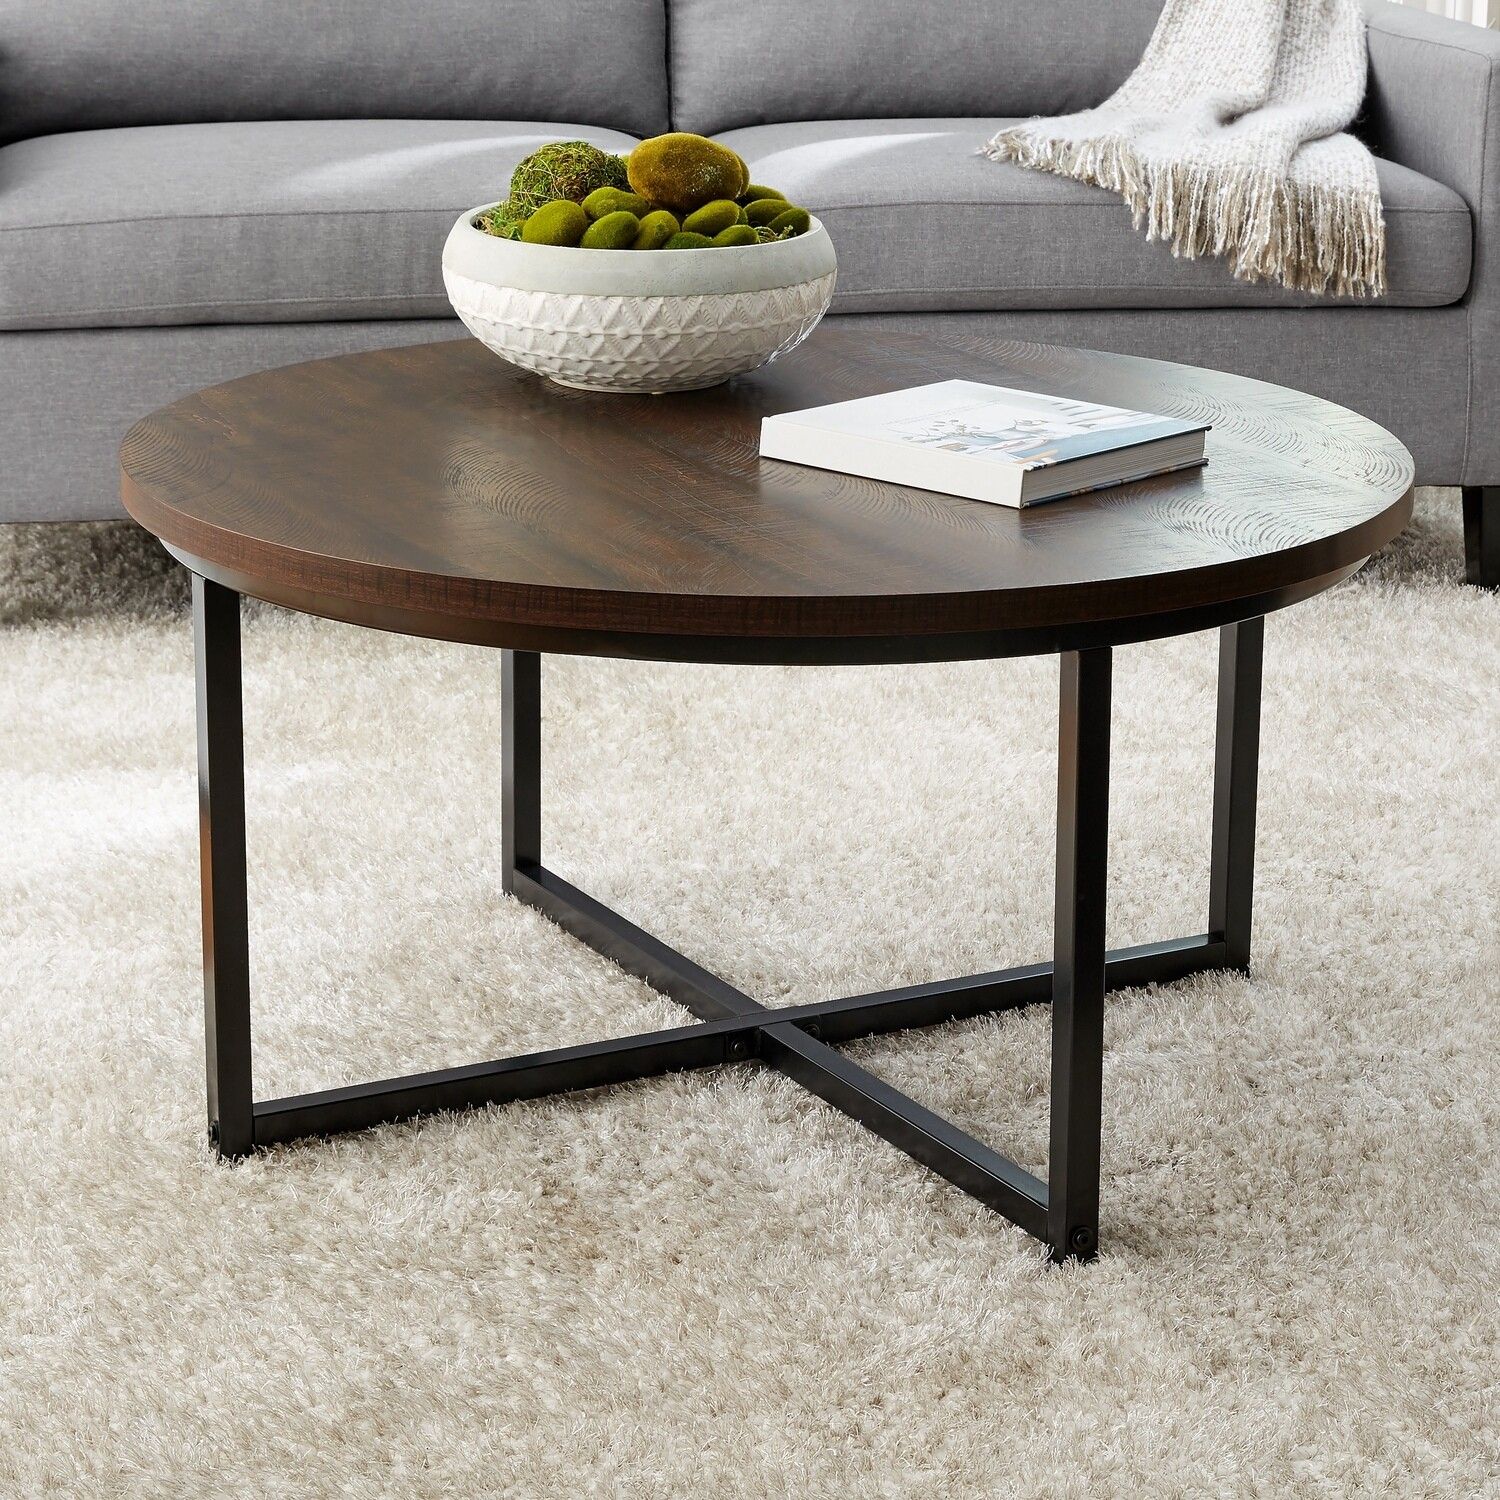 Round Coffee Table With Metal Legs, 36" D X 19" H Pertaining To Coffee Tables With Metal Legs (View 8 of 15)